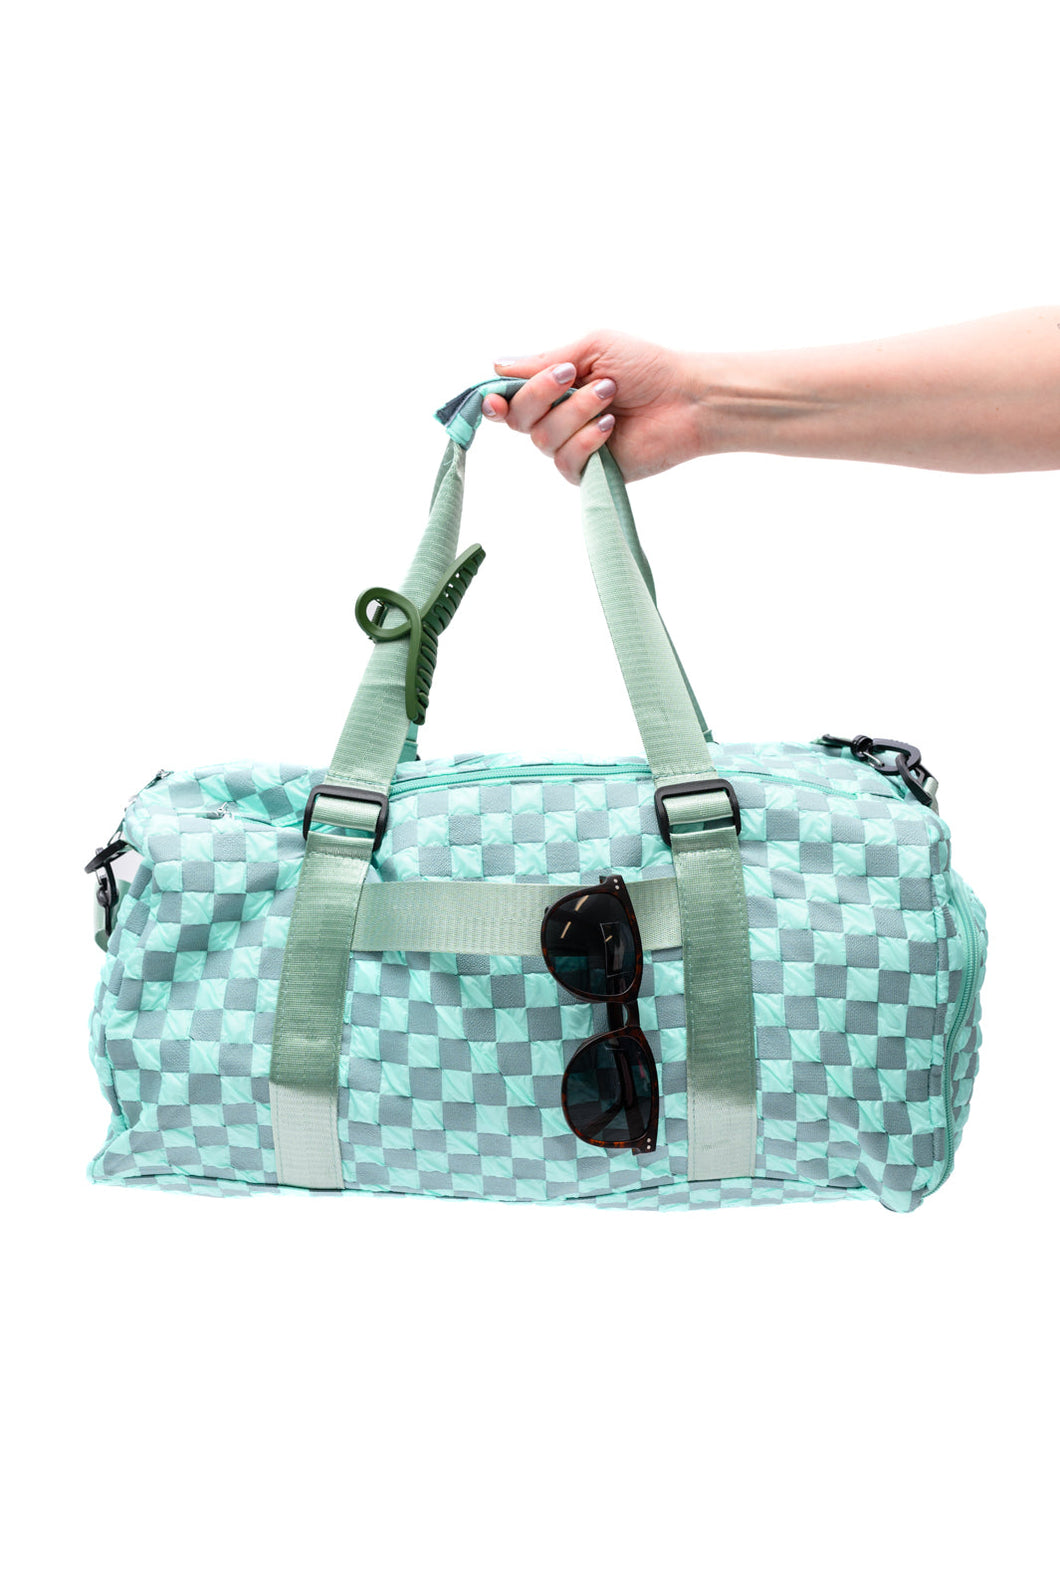 Travel Duffle in Teal